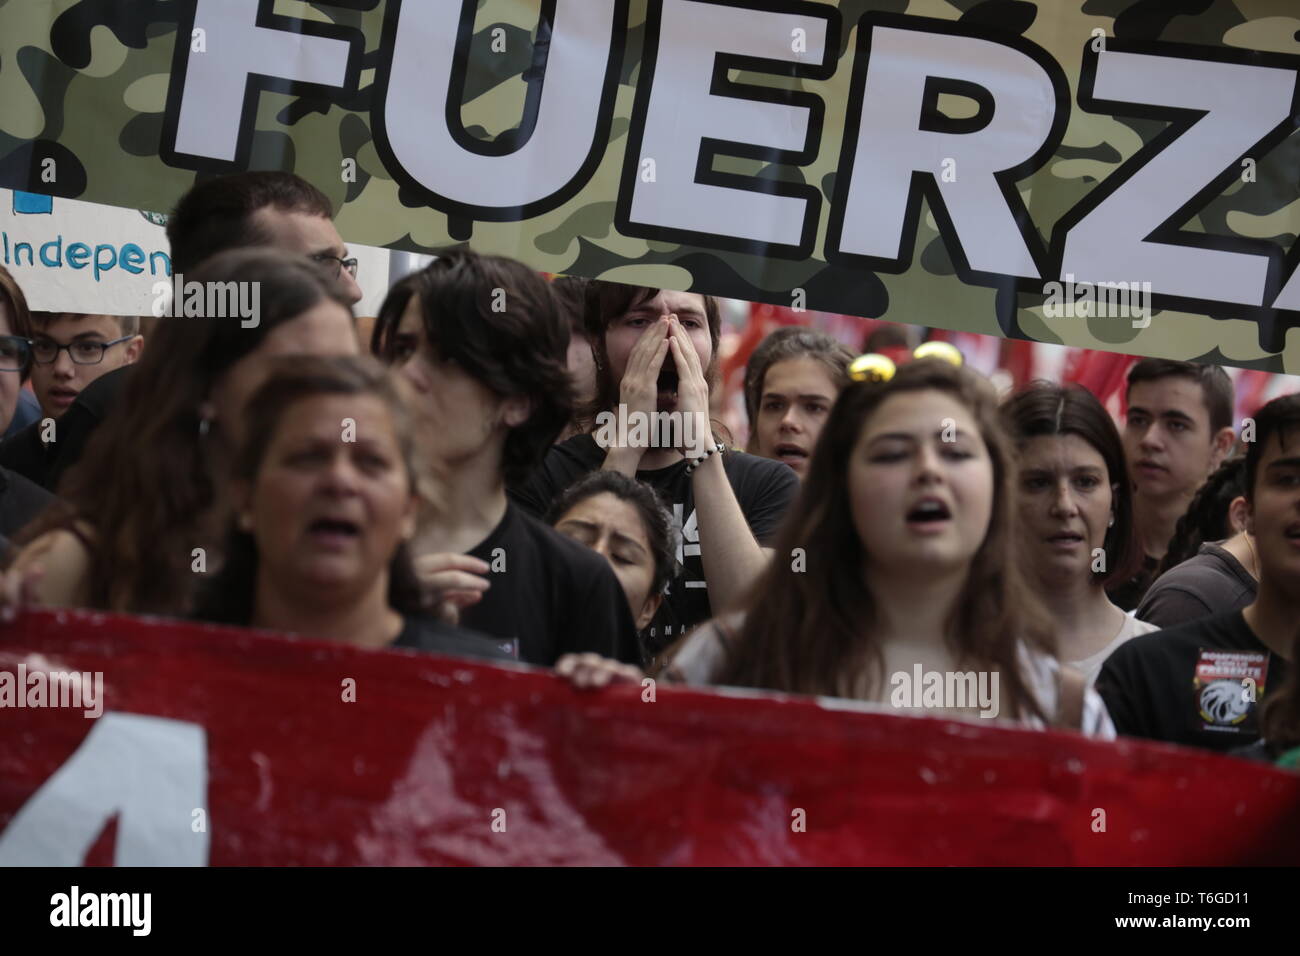 Madrid, Spain. 1st May, 2019. Protesters are seen shouting slogans during the demonstration.Thousands of protesters demonstrate on the International Workers' Day convoked by the majority unions UGT and CCOO to demand policies and reductions in unemployment levels in Spain, against job insecurity and labour rights. Politicians of the PSOE and Podemos have participated in the demonstration. Credit: Lito Lizana/SOPA Images/ZUMA Wire/Alamy Live News Stock Photo